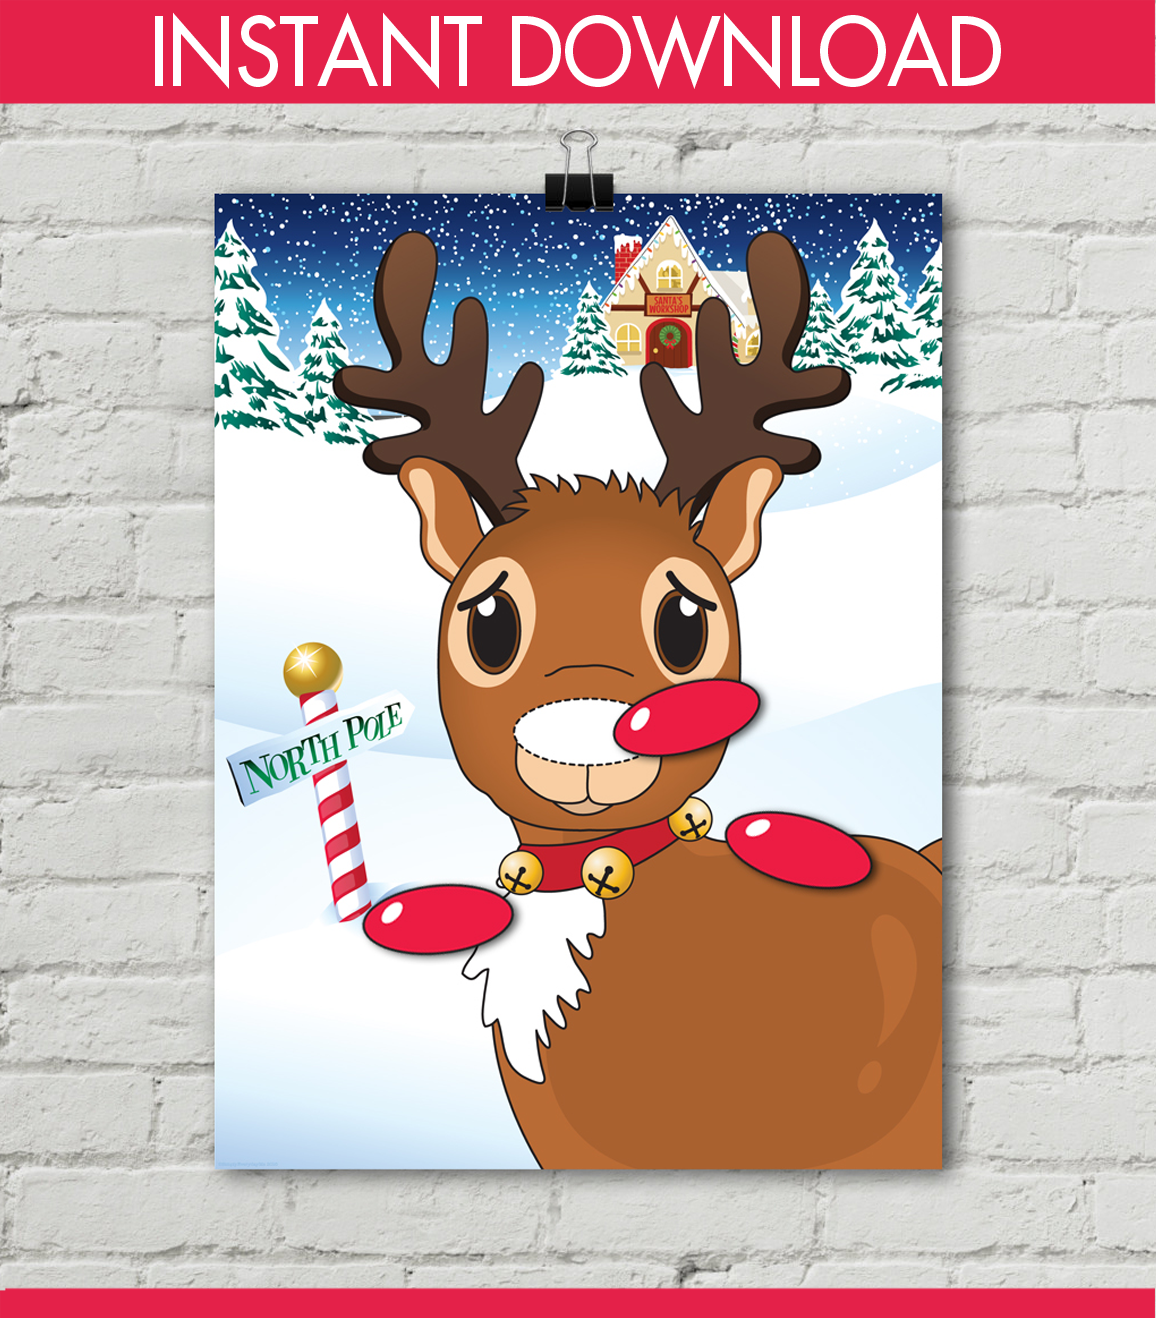 simplyeverydayme-pin-the-nose-on-the-reindeer-game